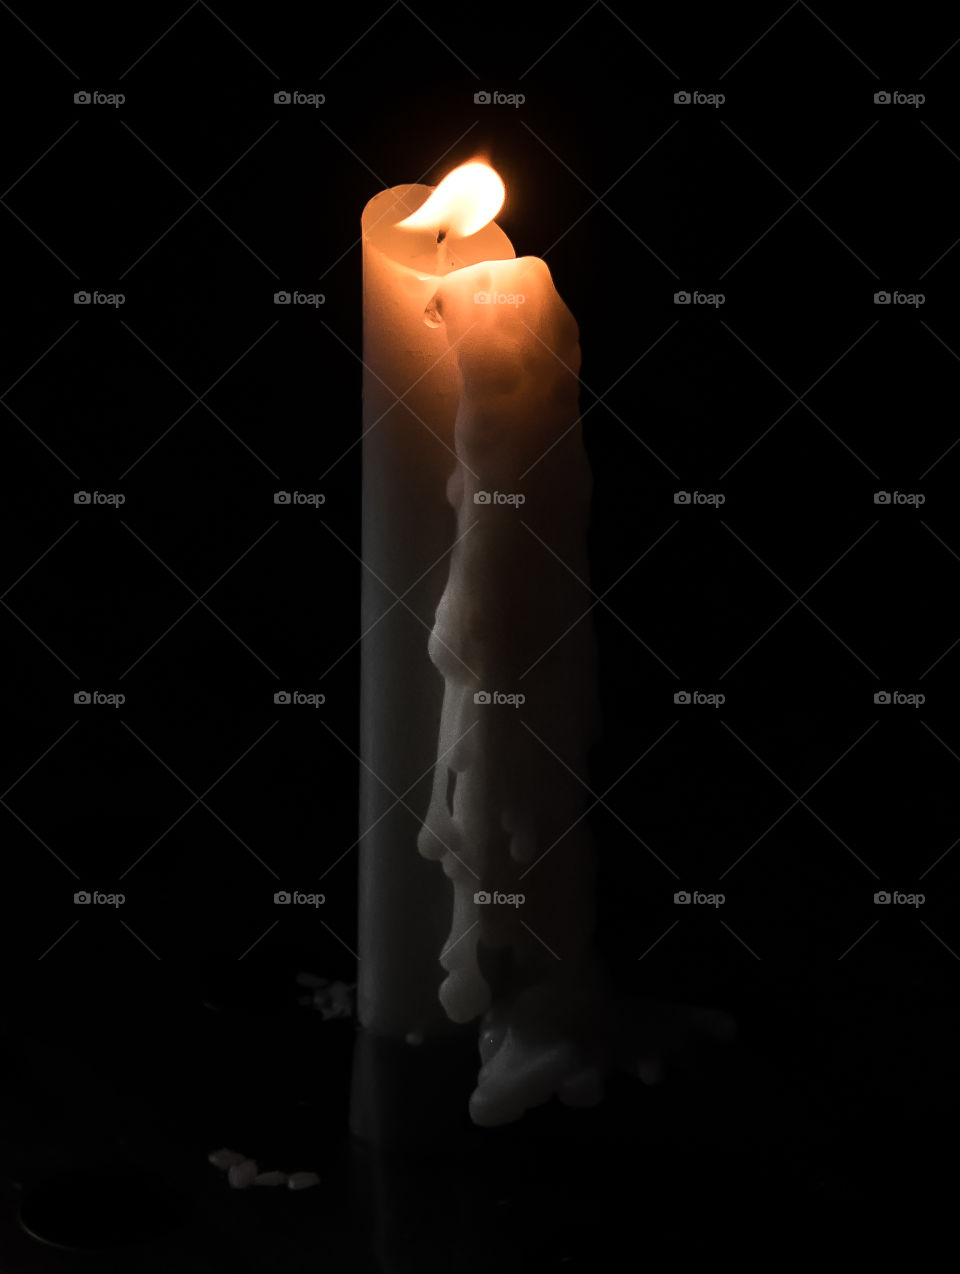 The lit candle 
